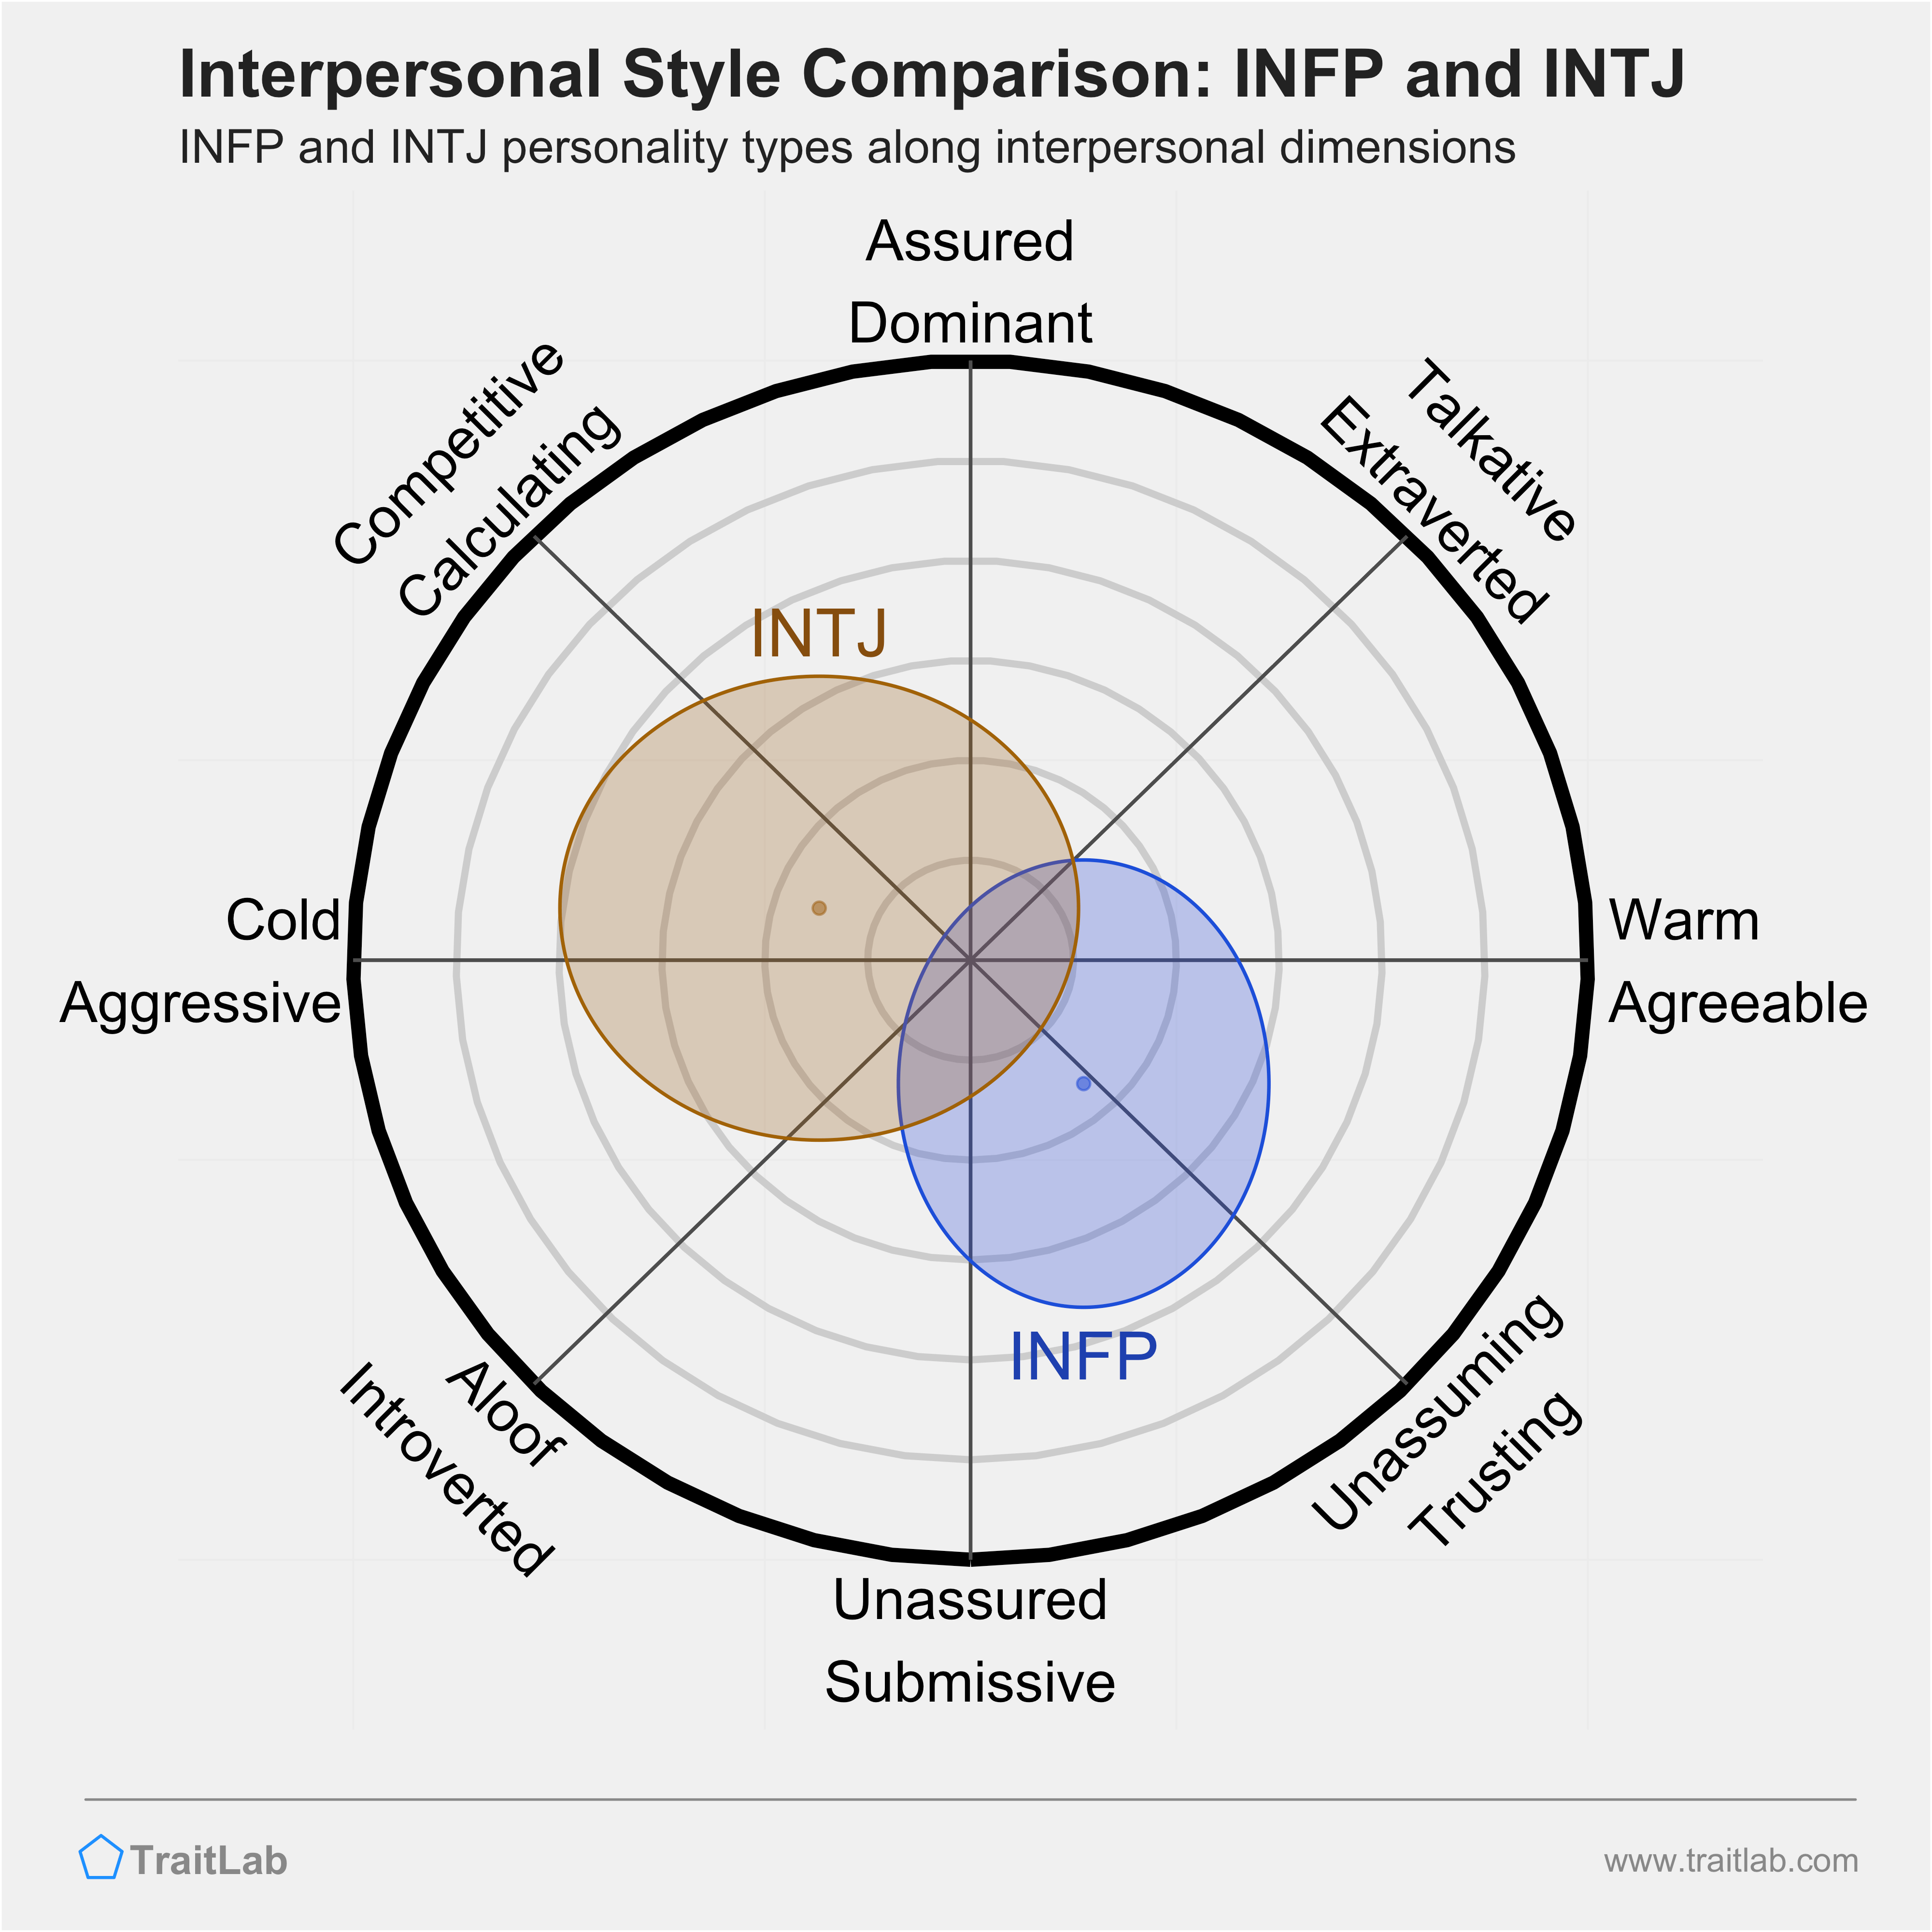 INFP and INTJ comparison across interpersonal dimensions